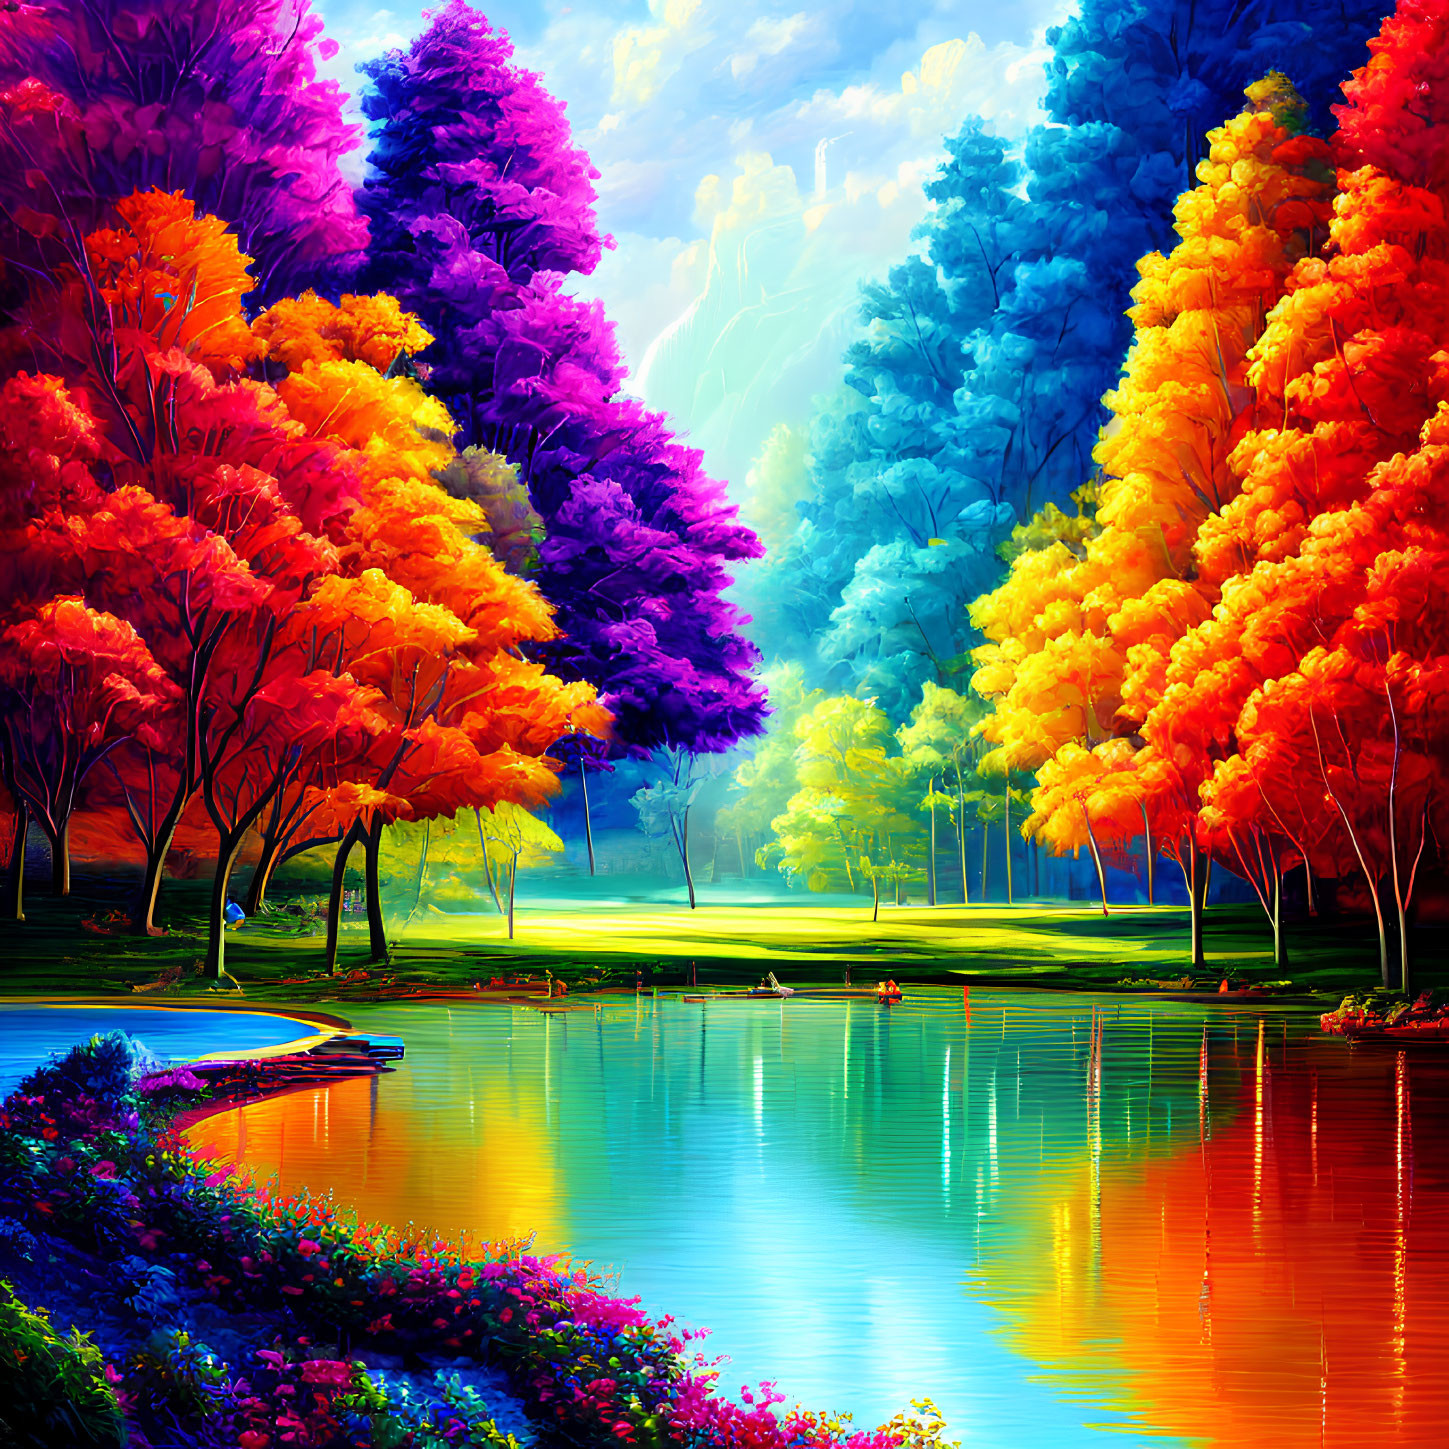 Colorful painting of serene park with rainbow trees and calm lake